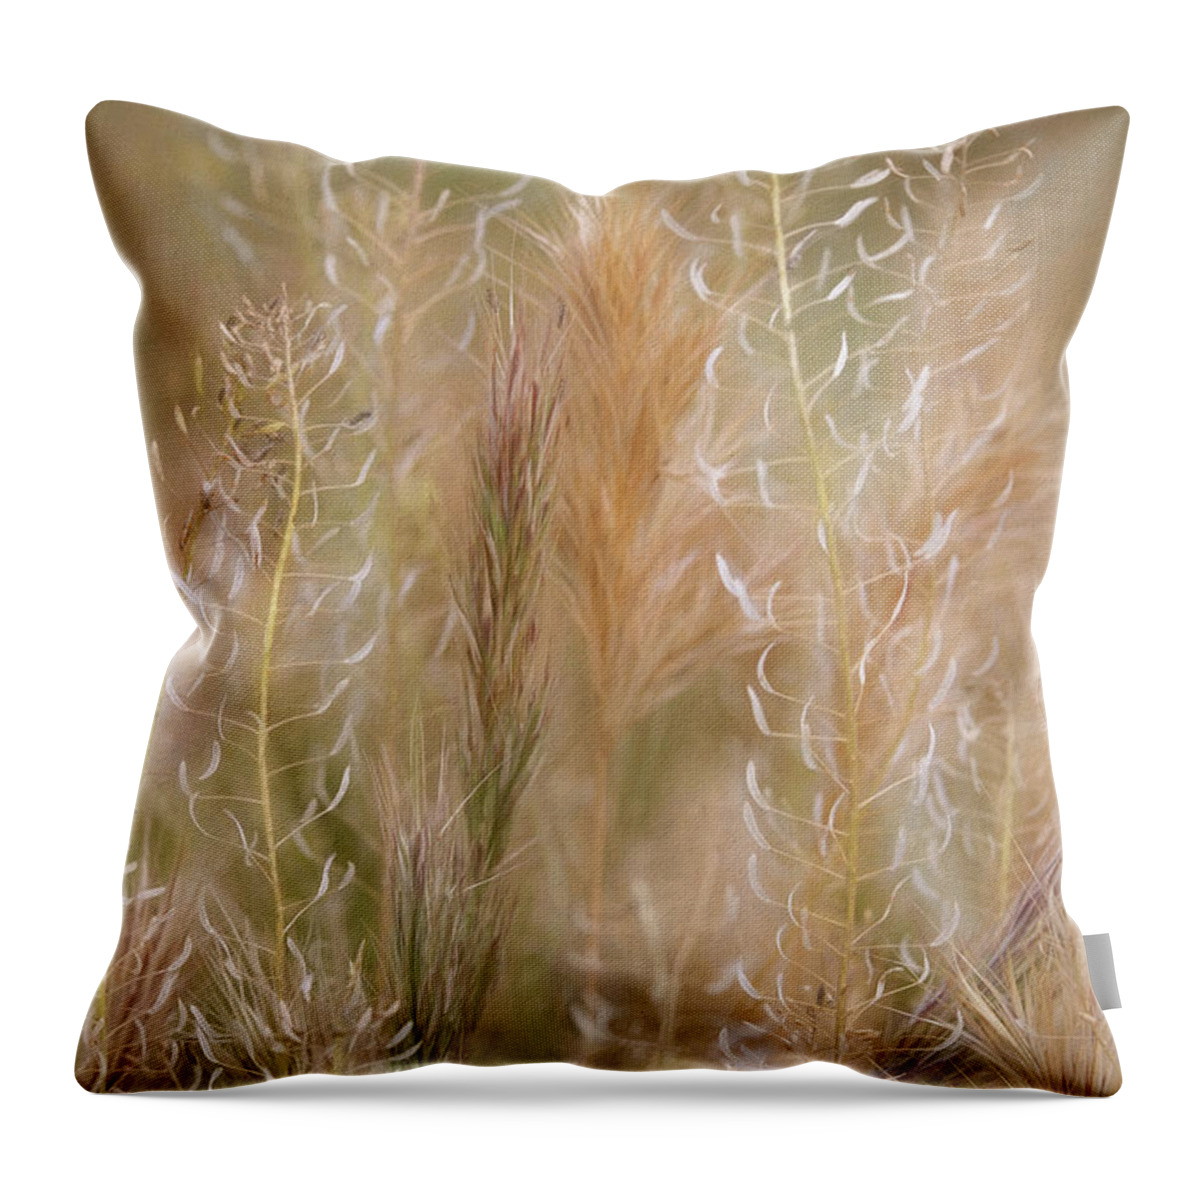 Grasses Throw Pillow featuring the photograph Colorful Grasses by Leda Robertson